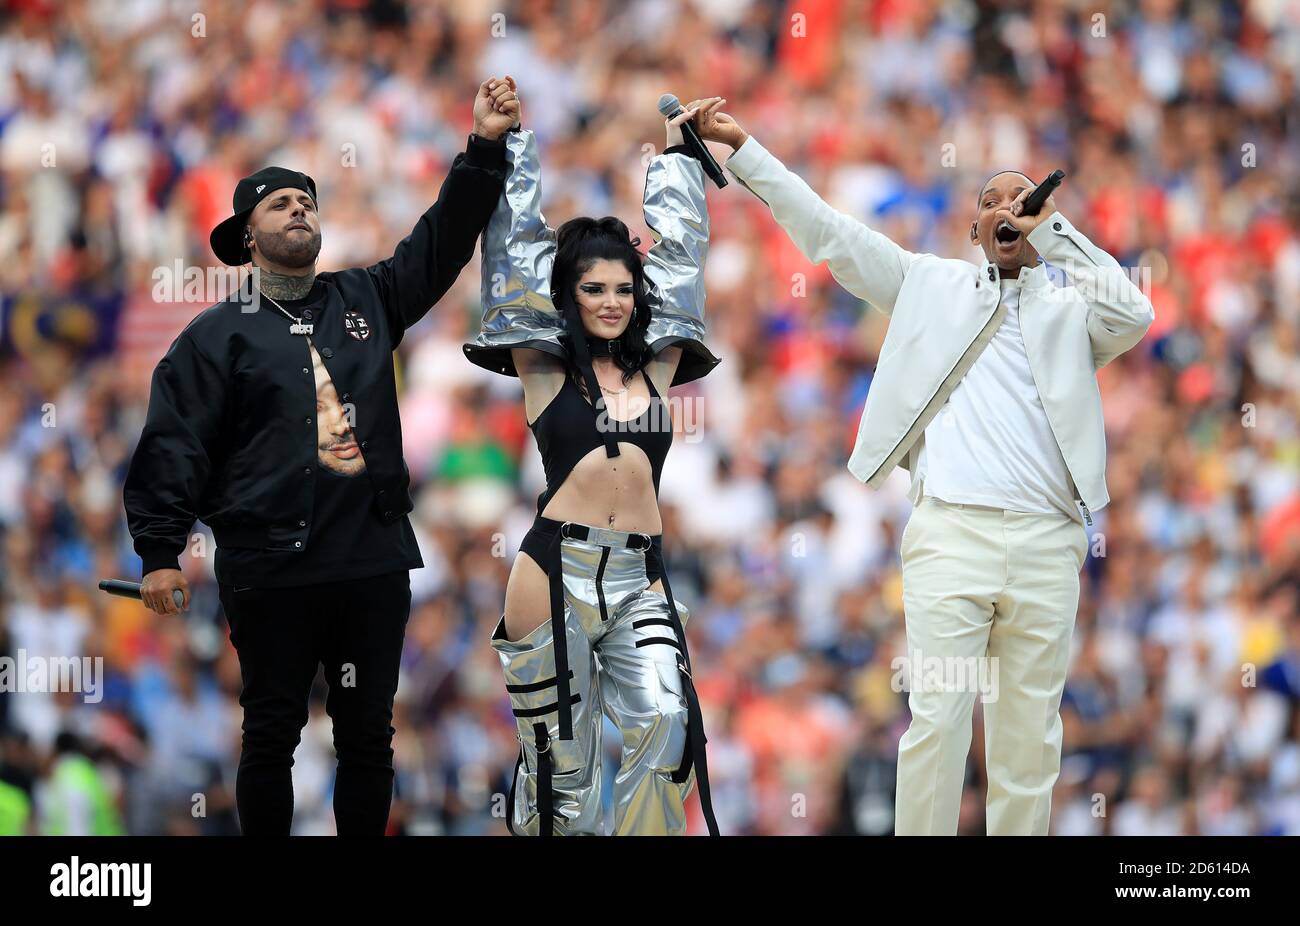 Nicky Jam, Era Istrefi and Will Smith performing for the closing ceremony  before the FIFA World Cup 2018 final at the Luzhniki Stadium in Moscow,  15th July 2018 Stock Photo - Alamy